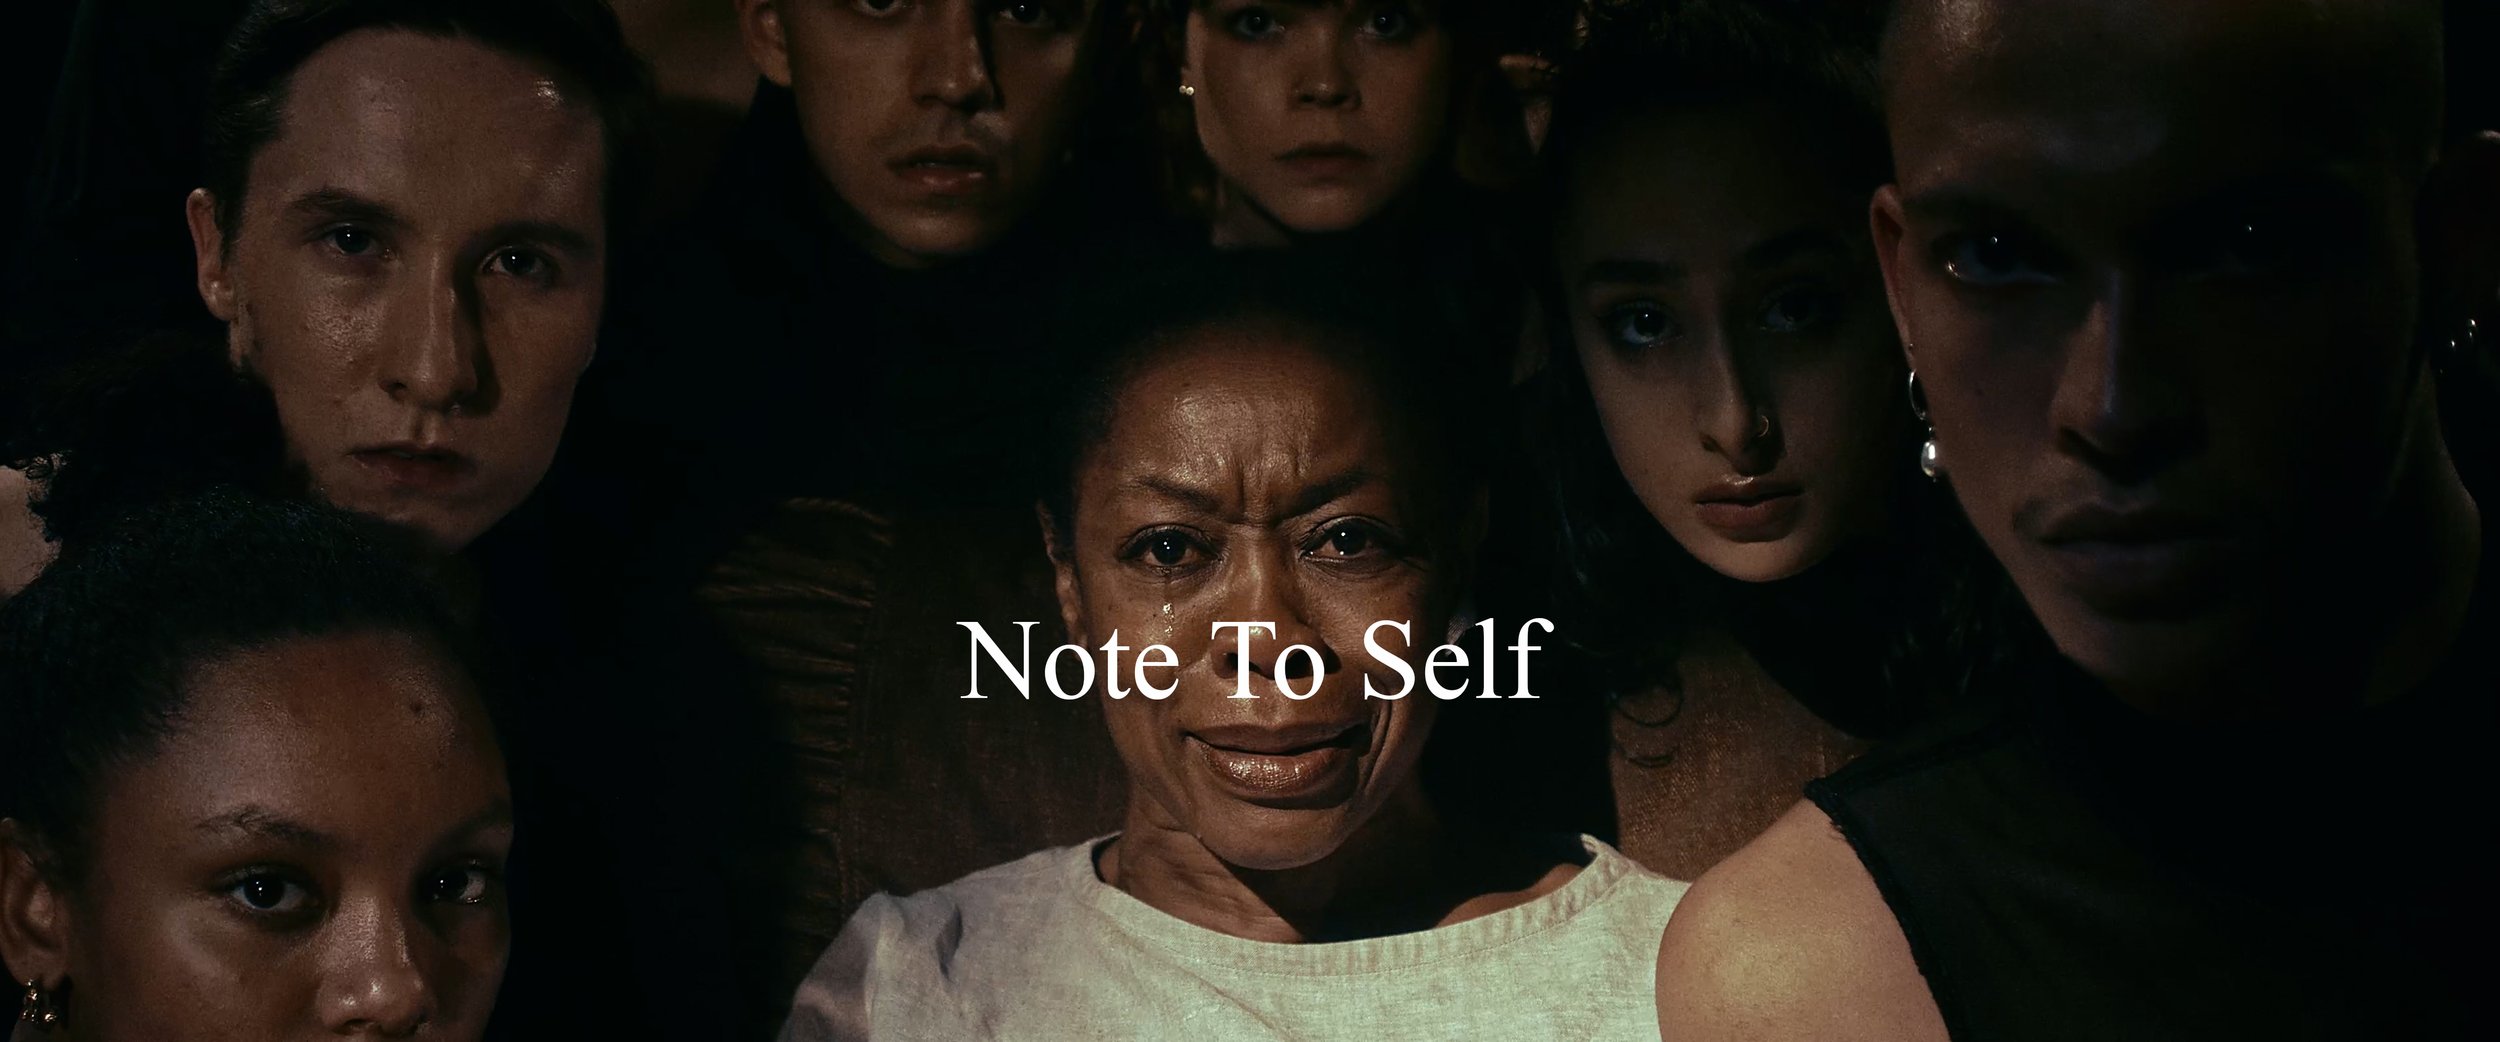 Note to Self_POSTER001.1.jpg